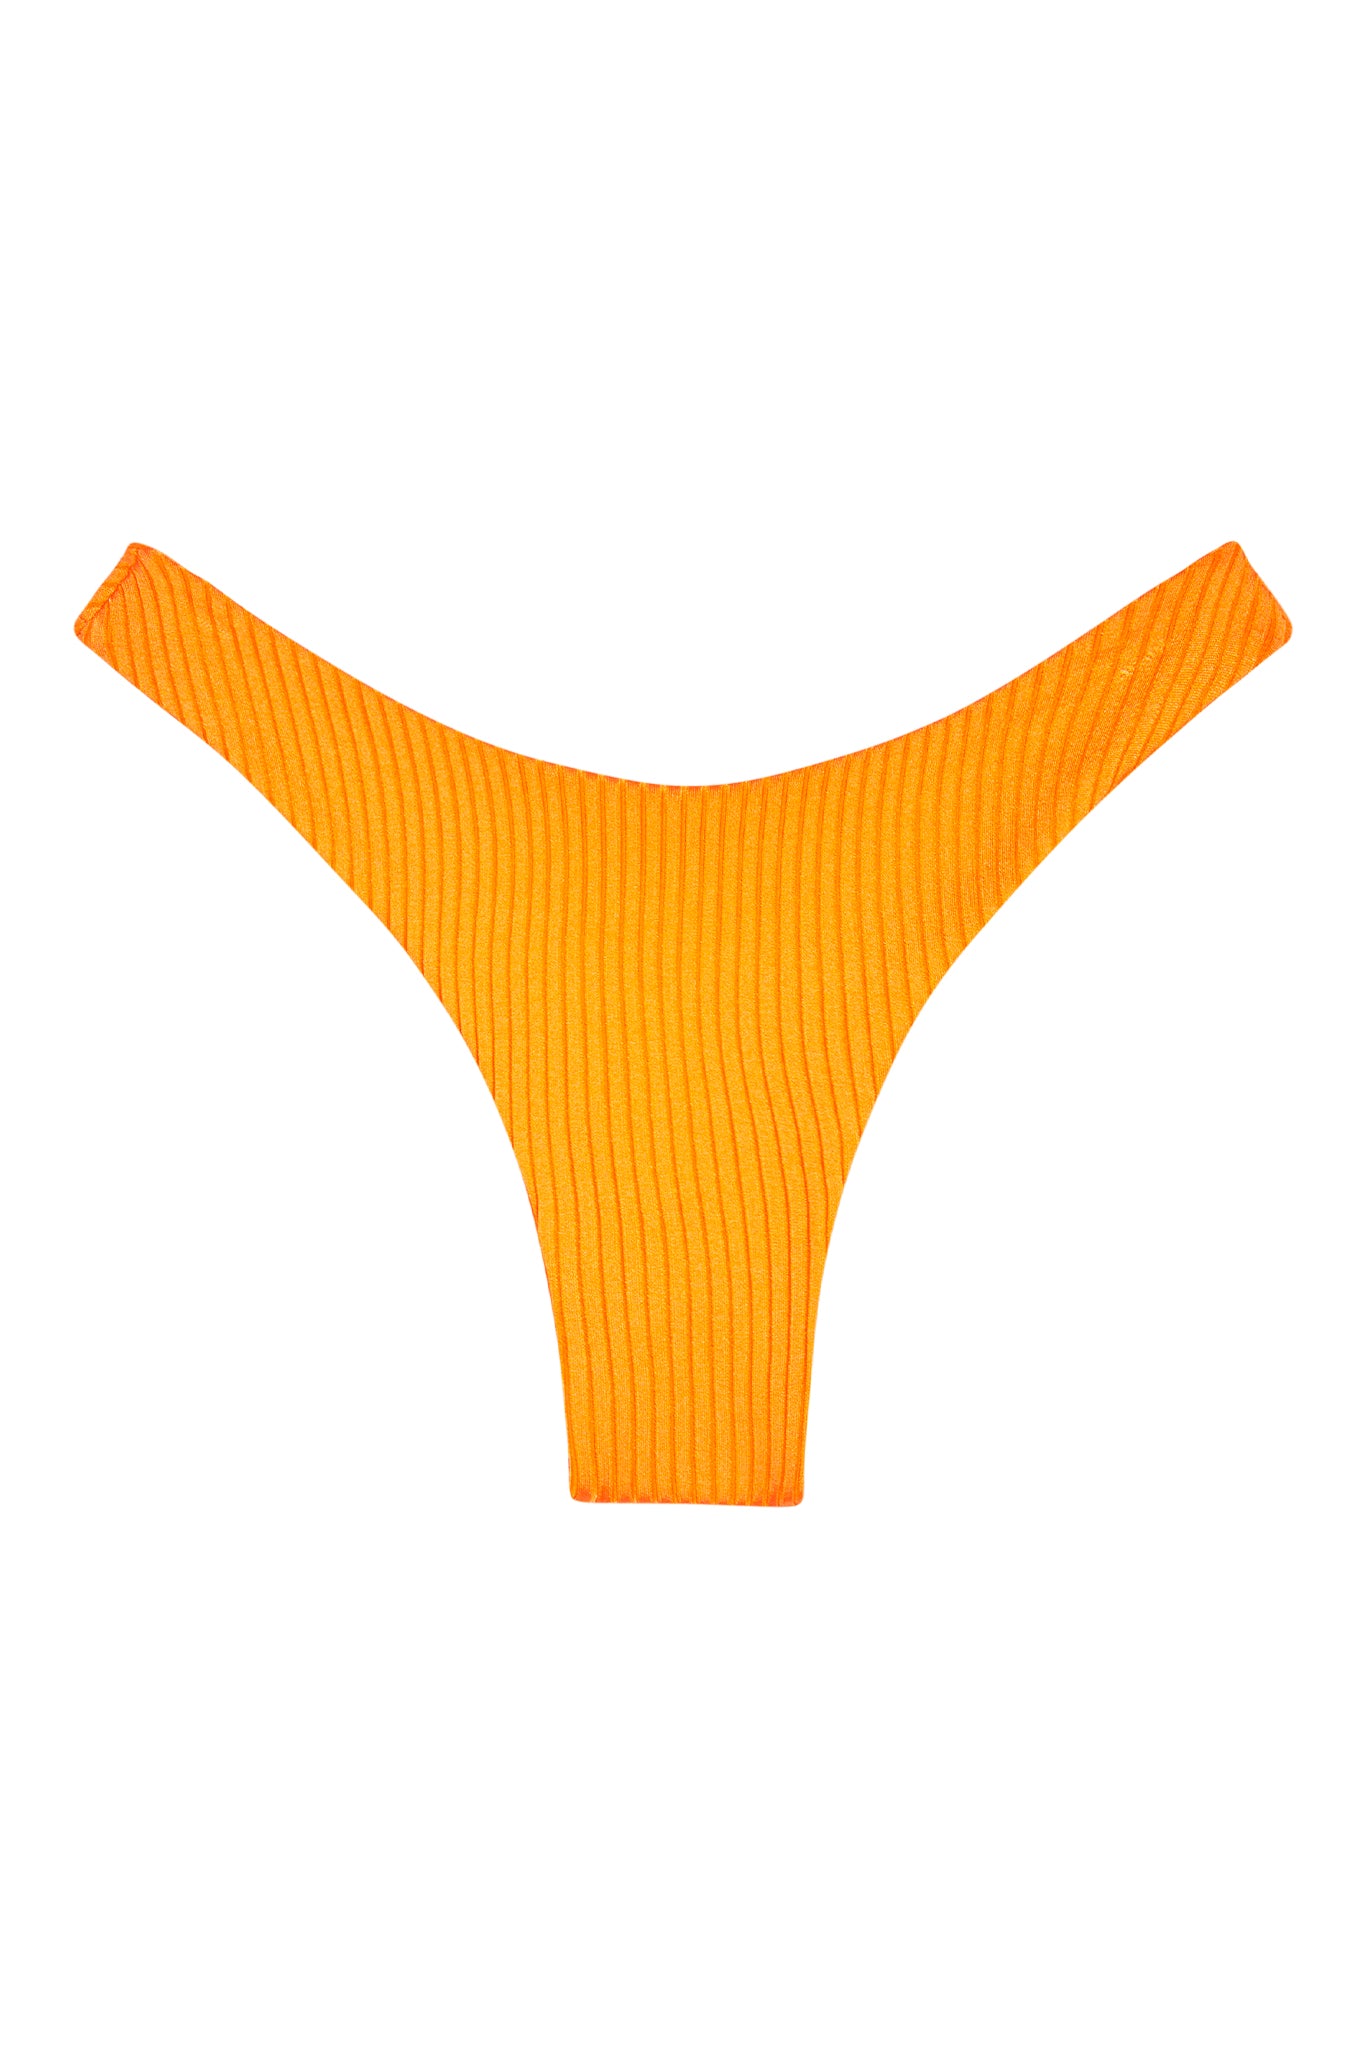 Ponder The Ocean Scalloped Ribbed Orange Swimsuit Top FINAL SALE